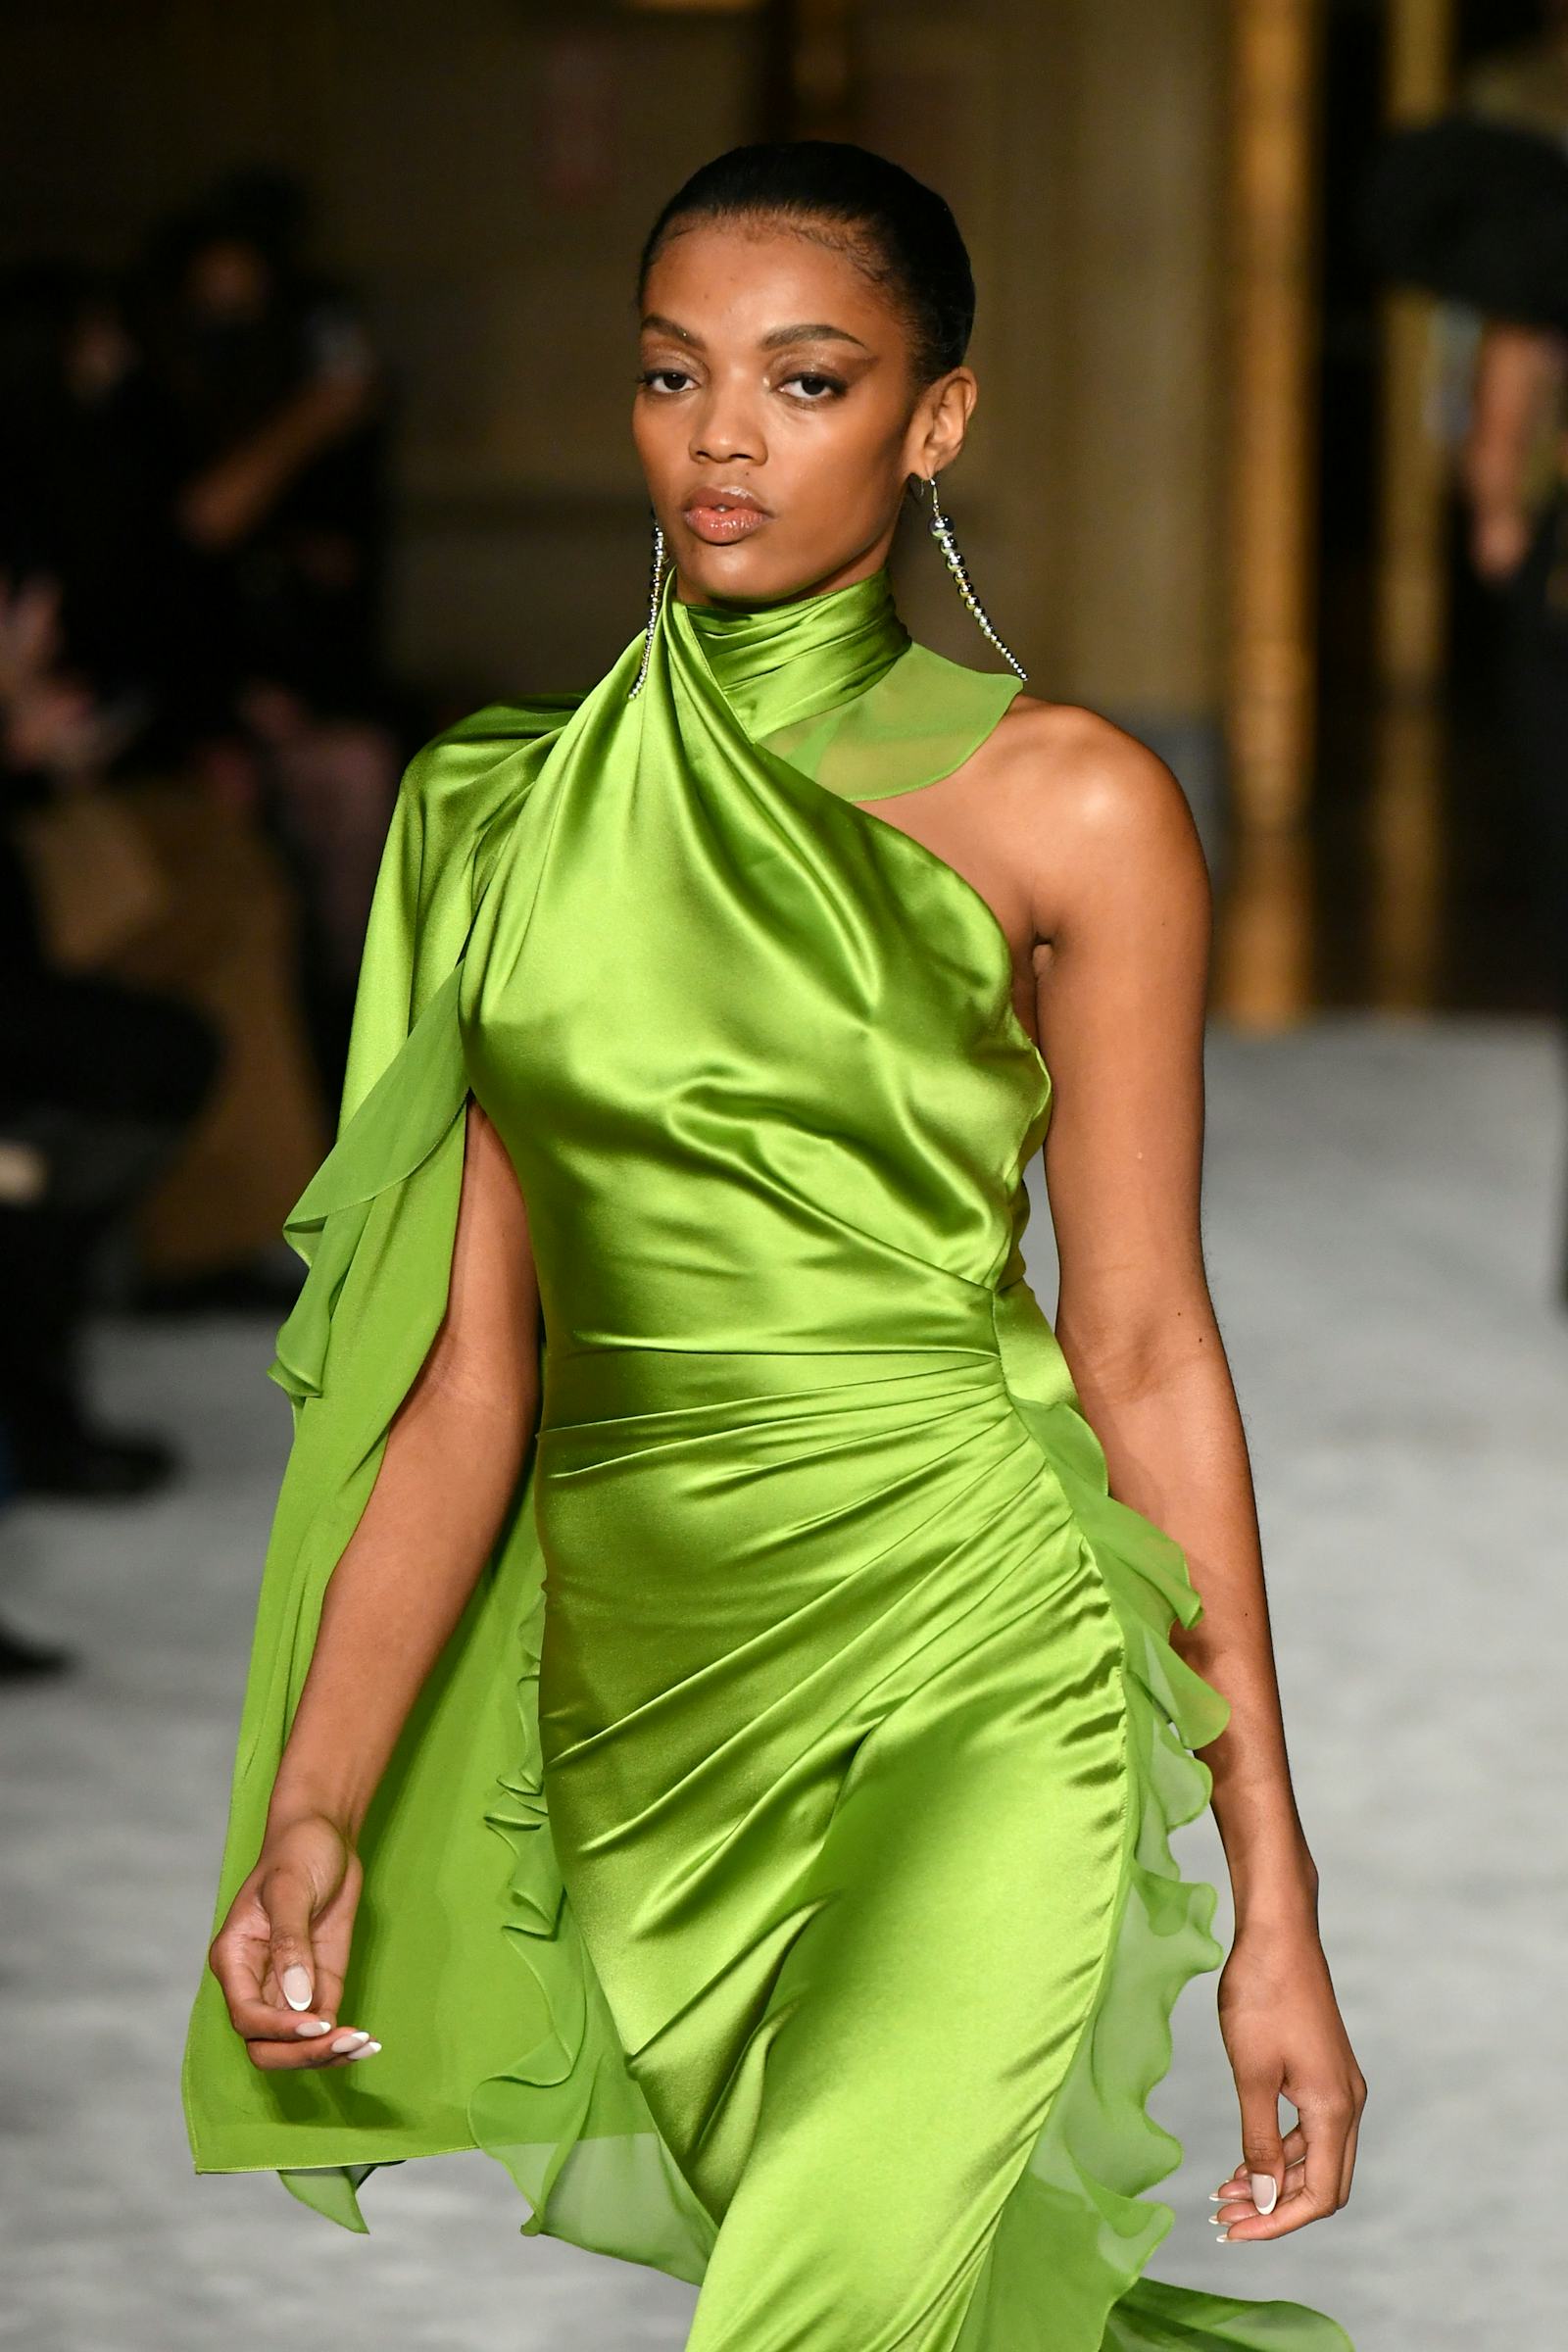 The Christian Siriano Fall 2021 Collection Is Inspired By The Outdoors